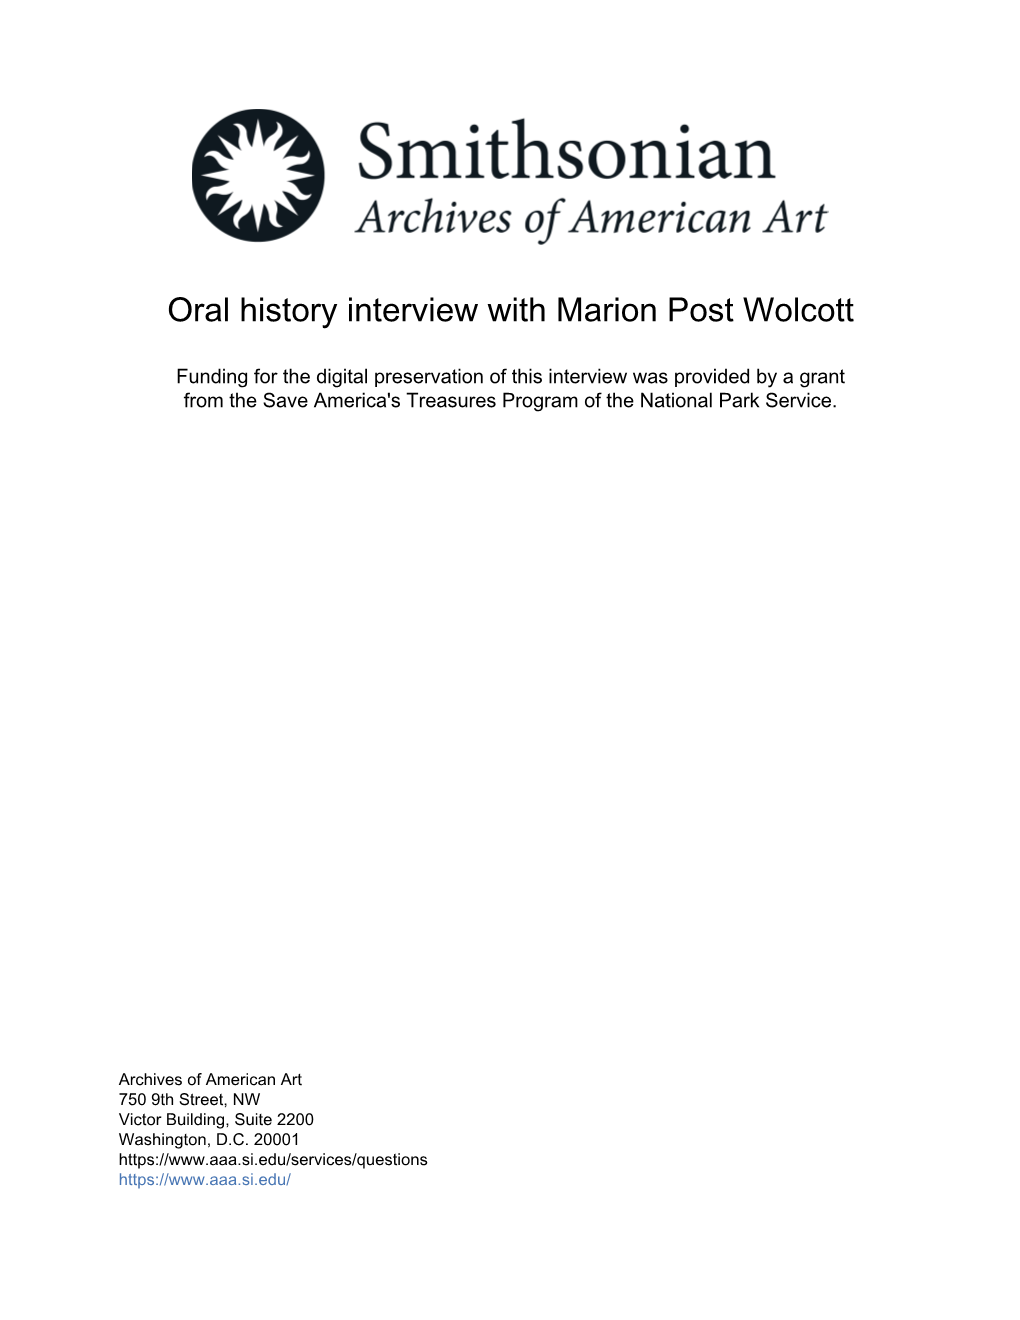 Oral History Interview with Marion Post Wolcott